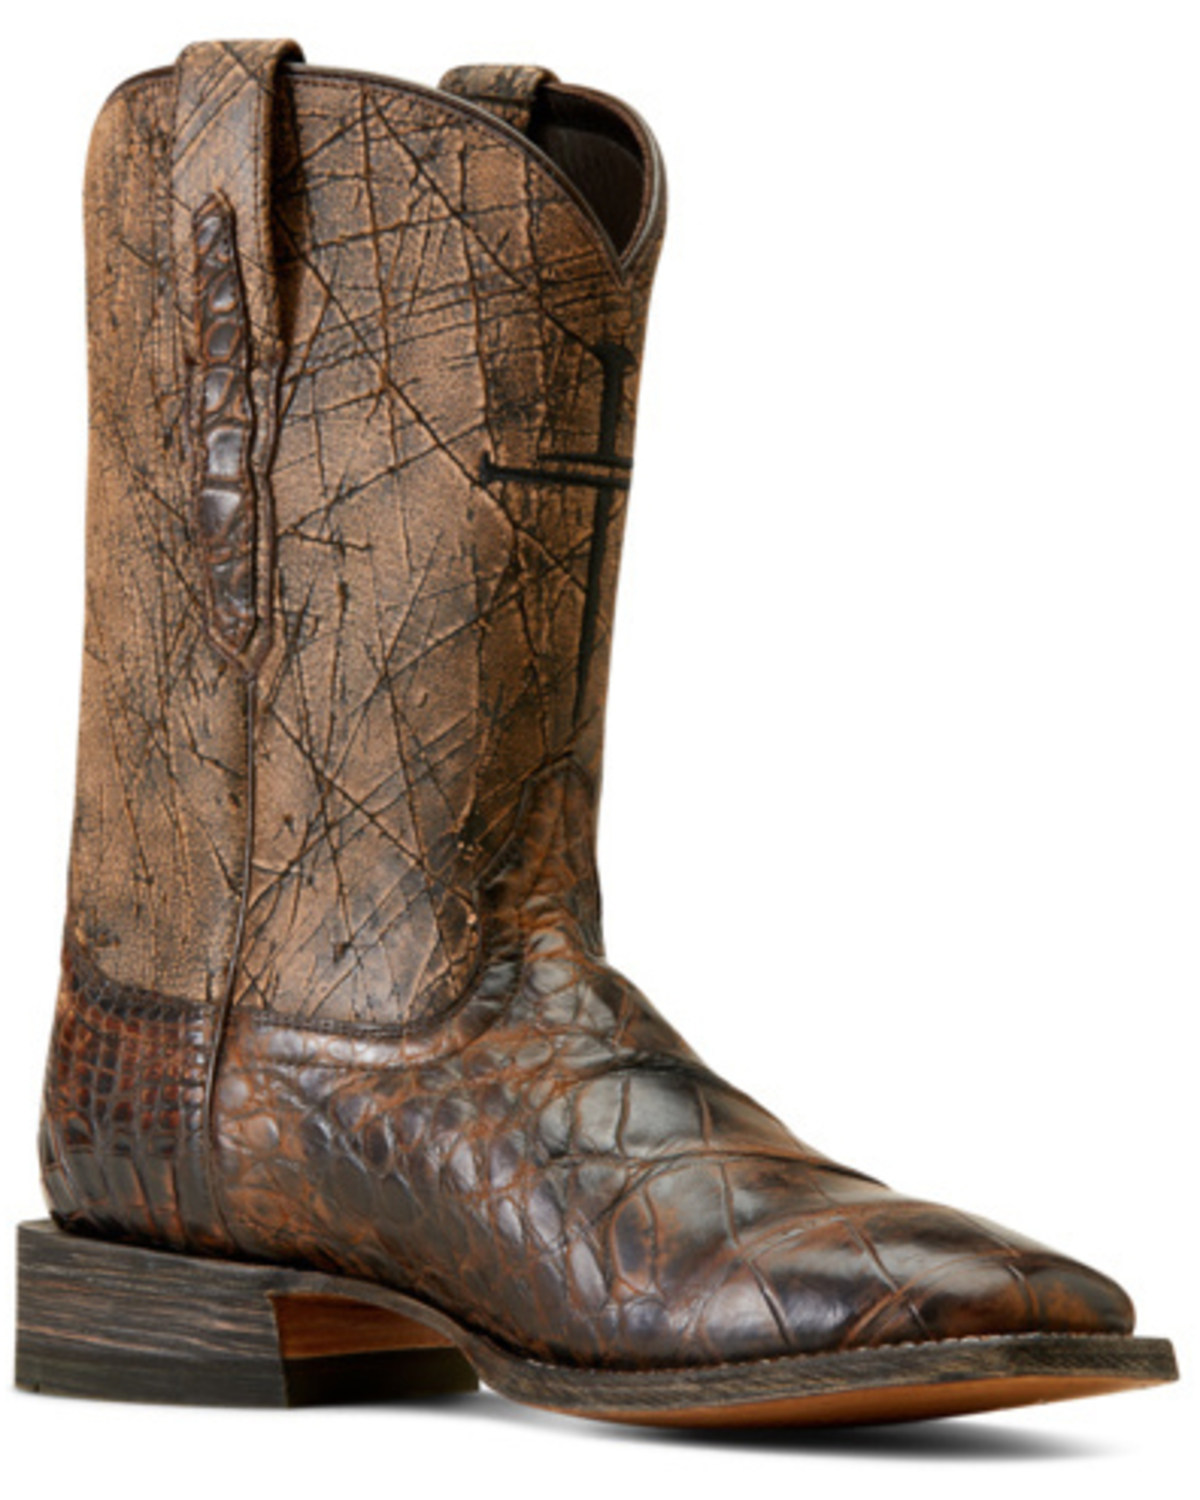 Ariat Men's Backwater Exotic Alligator Western Boots - Broad Square Toe